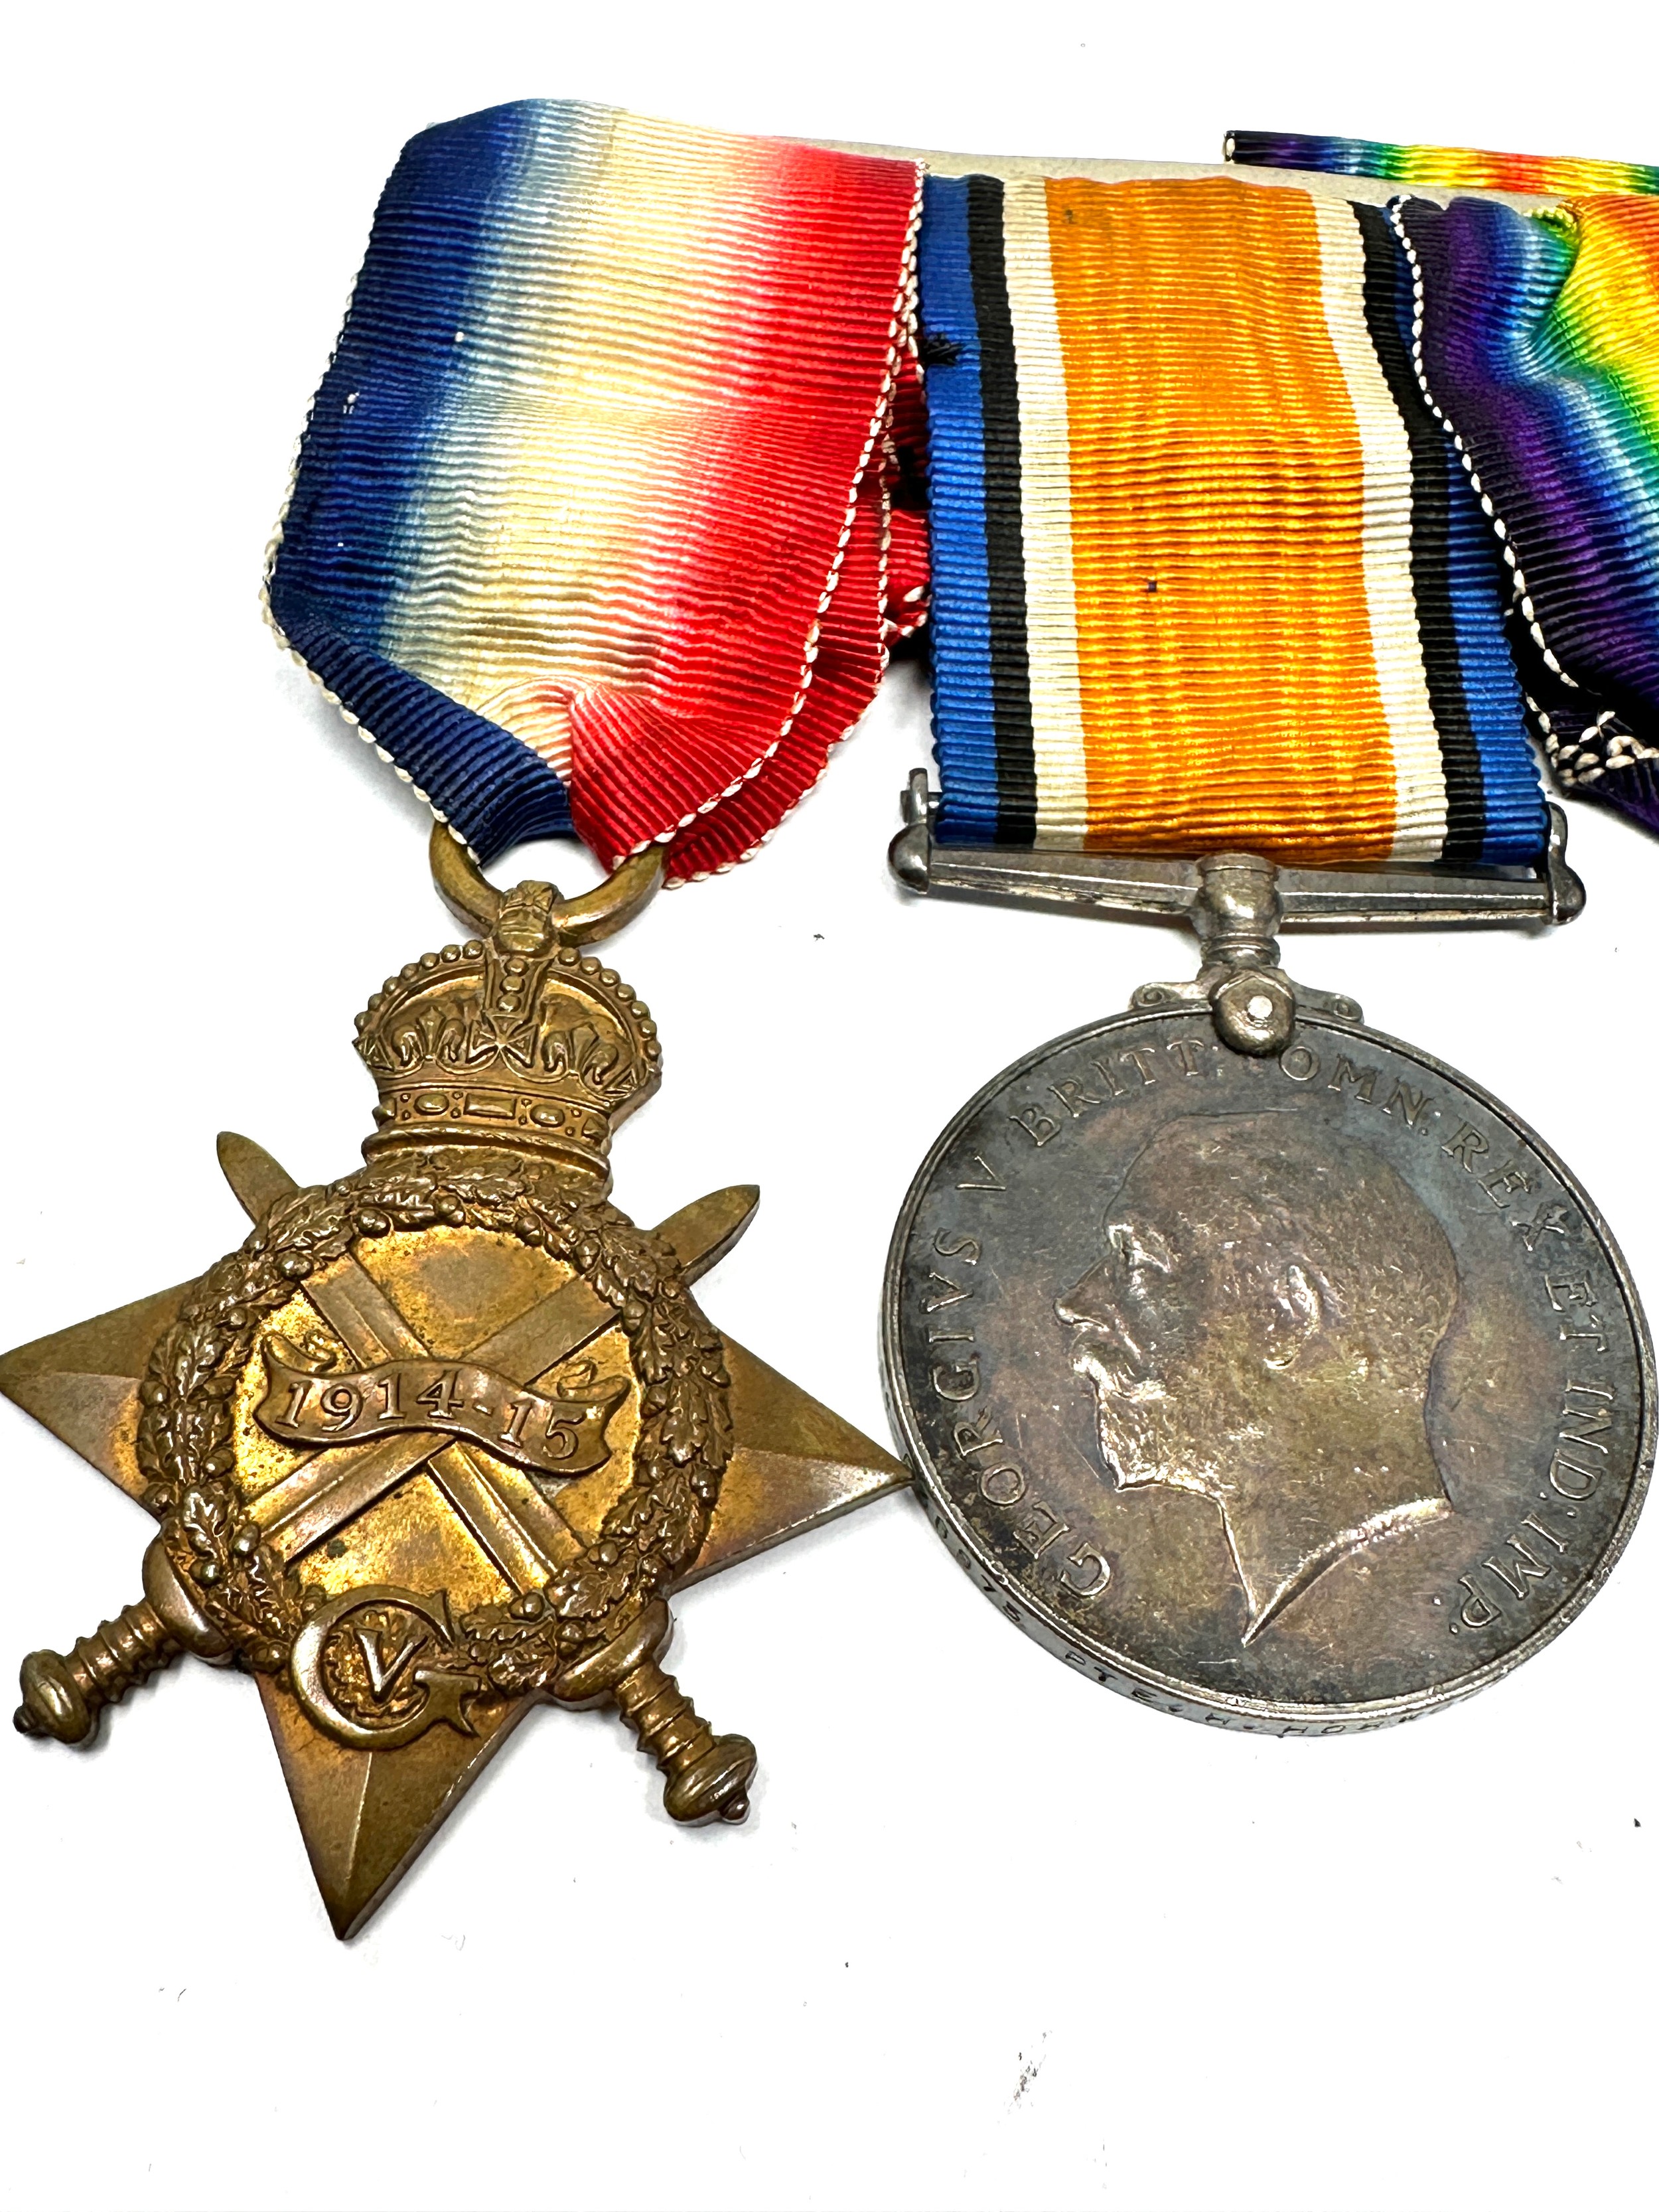 WW1 1914-15 Star Trio, Mounted, Named S4-038973 Pte H. Horwood A.S.C - Image 2 of 3